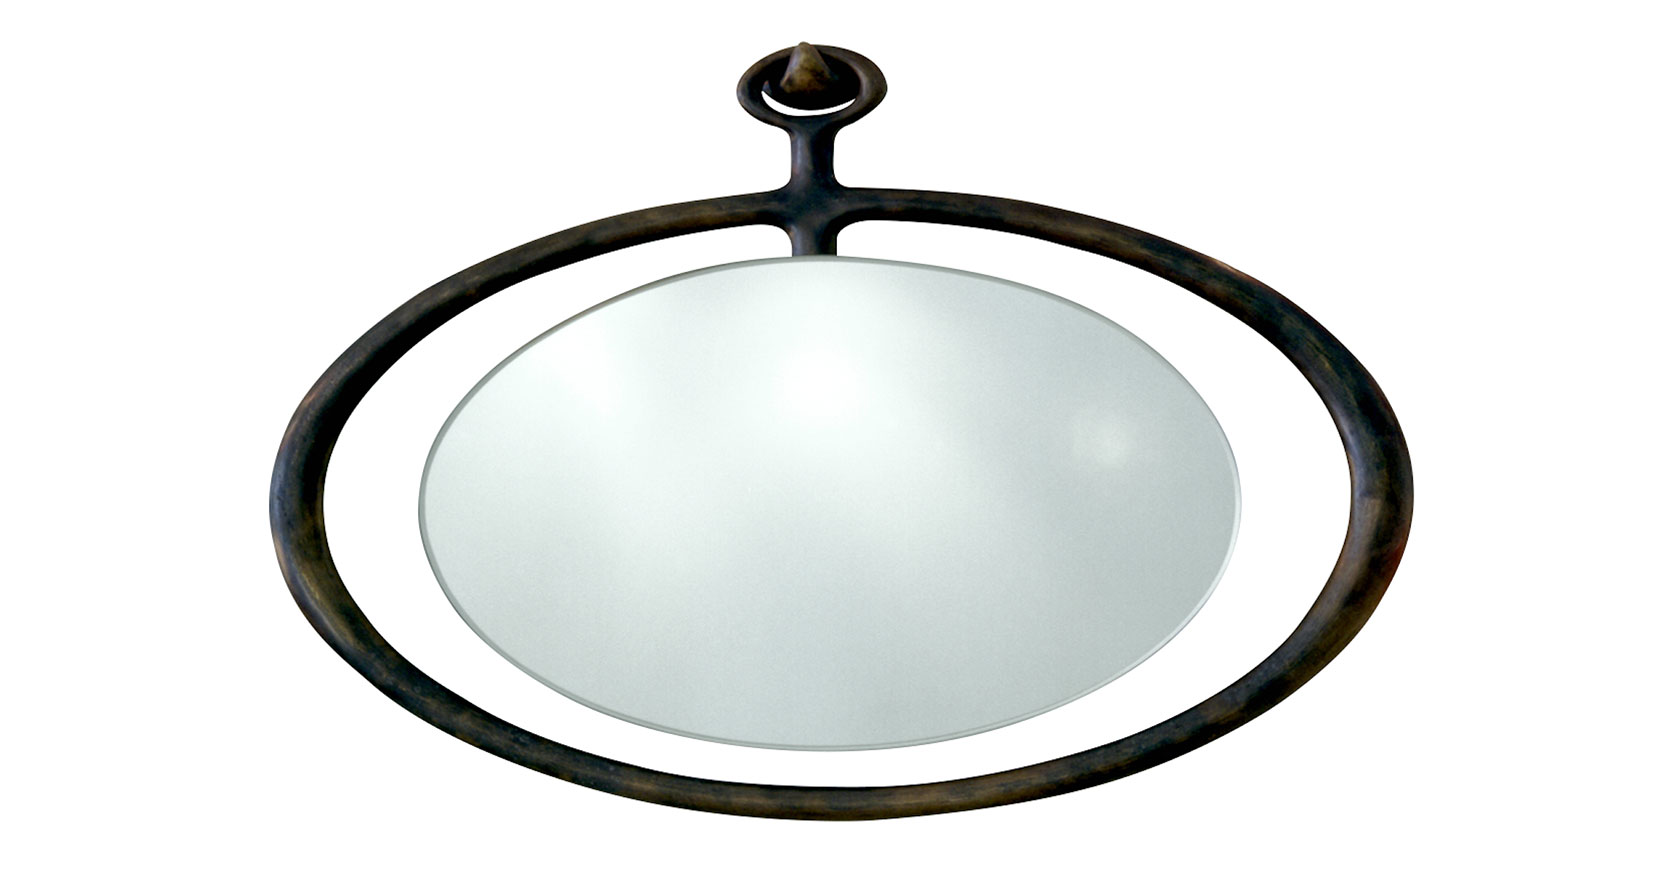 Eric Robin, horizontal oval mirror frame in n brown bronze, with a smaller oval mirror suspended in the air all hanging from a wall hook in brown bronze